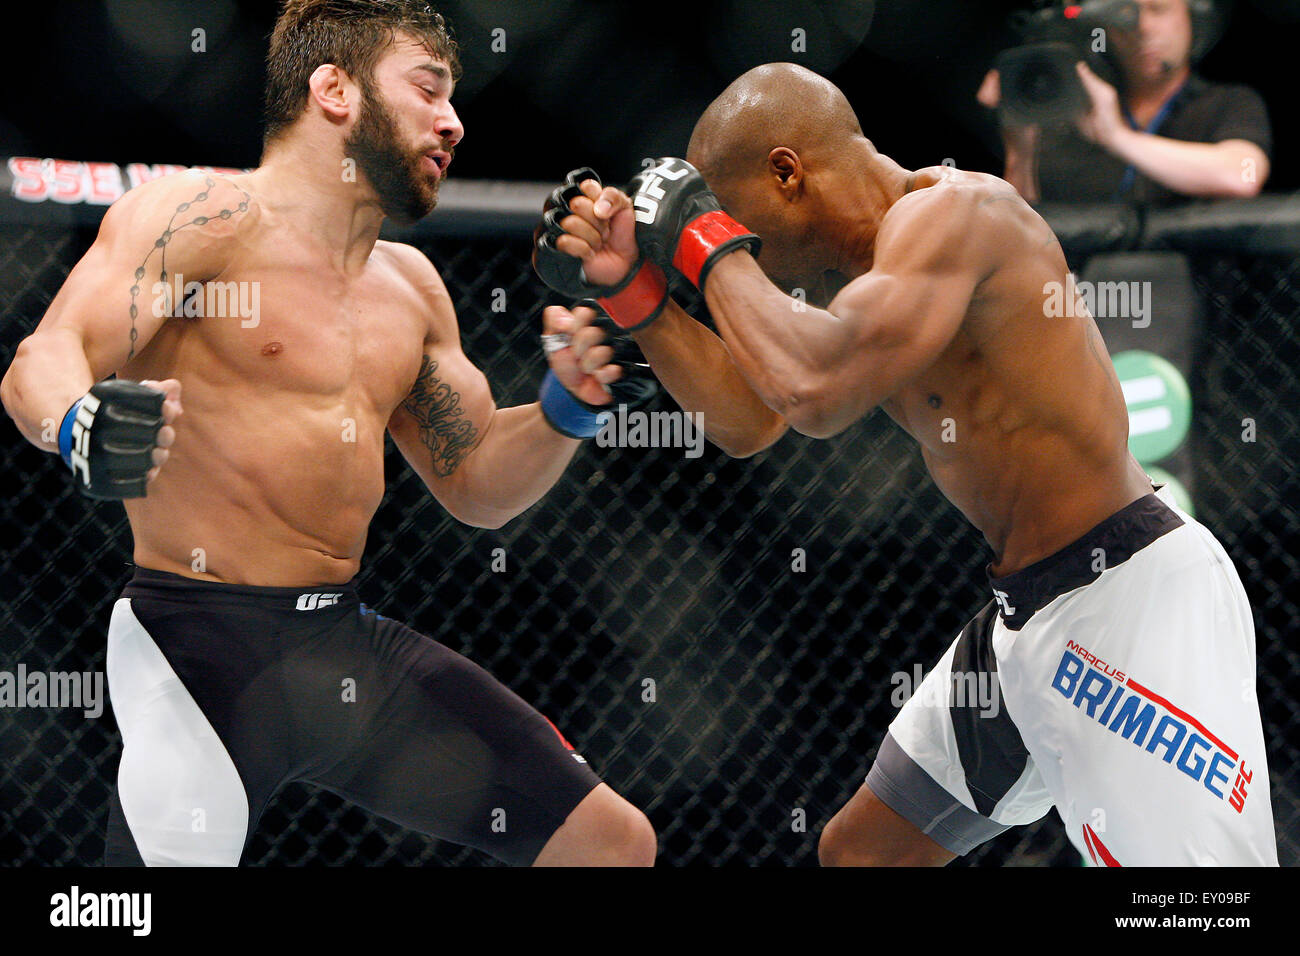 Glasgow, Scotland, UK. 18th July, 2015. Jimmie Rivera beats Marcus Brimage in the first round by TKO during UFC Fight Night 72: Bisping vs Leites at The SSE Hydro on Saturday the 18 of July 2015 Credit:  Dan Cooke/Alamy Live News Stock Photo